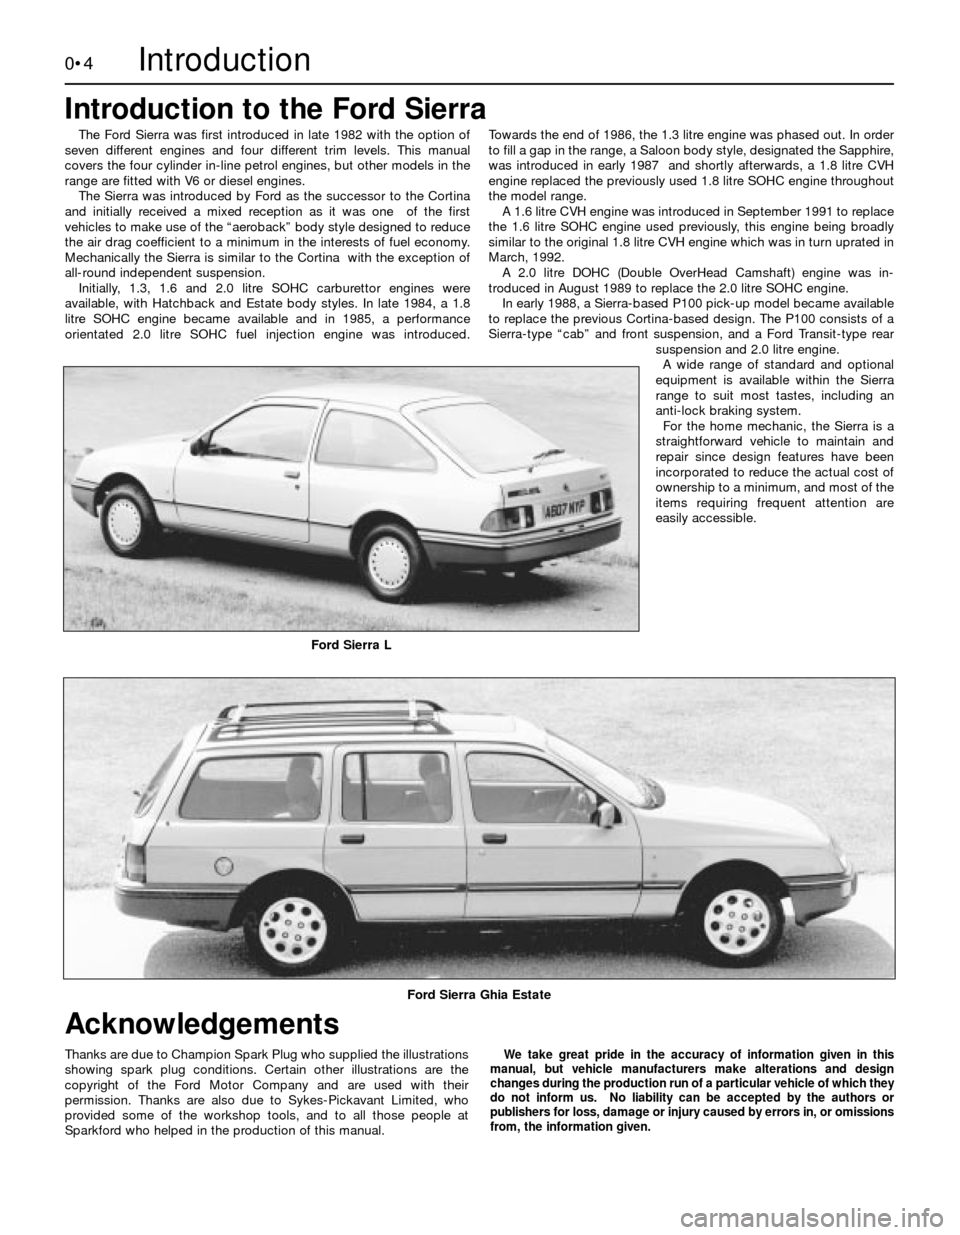 FORD SIERRA 1993 2.G Introduction Workshop Manual 0•4
The Ford Sierra was first introduced in late 1982 with the option of
seven different engines and four different trim levels. This manual
covers the four cylinder in-line petrol engines, but othe